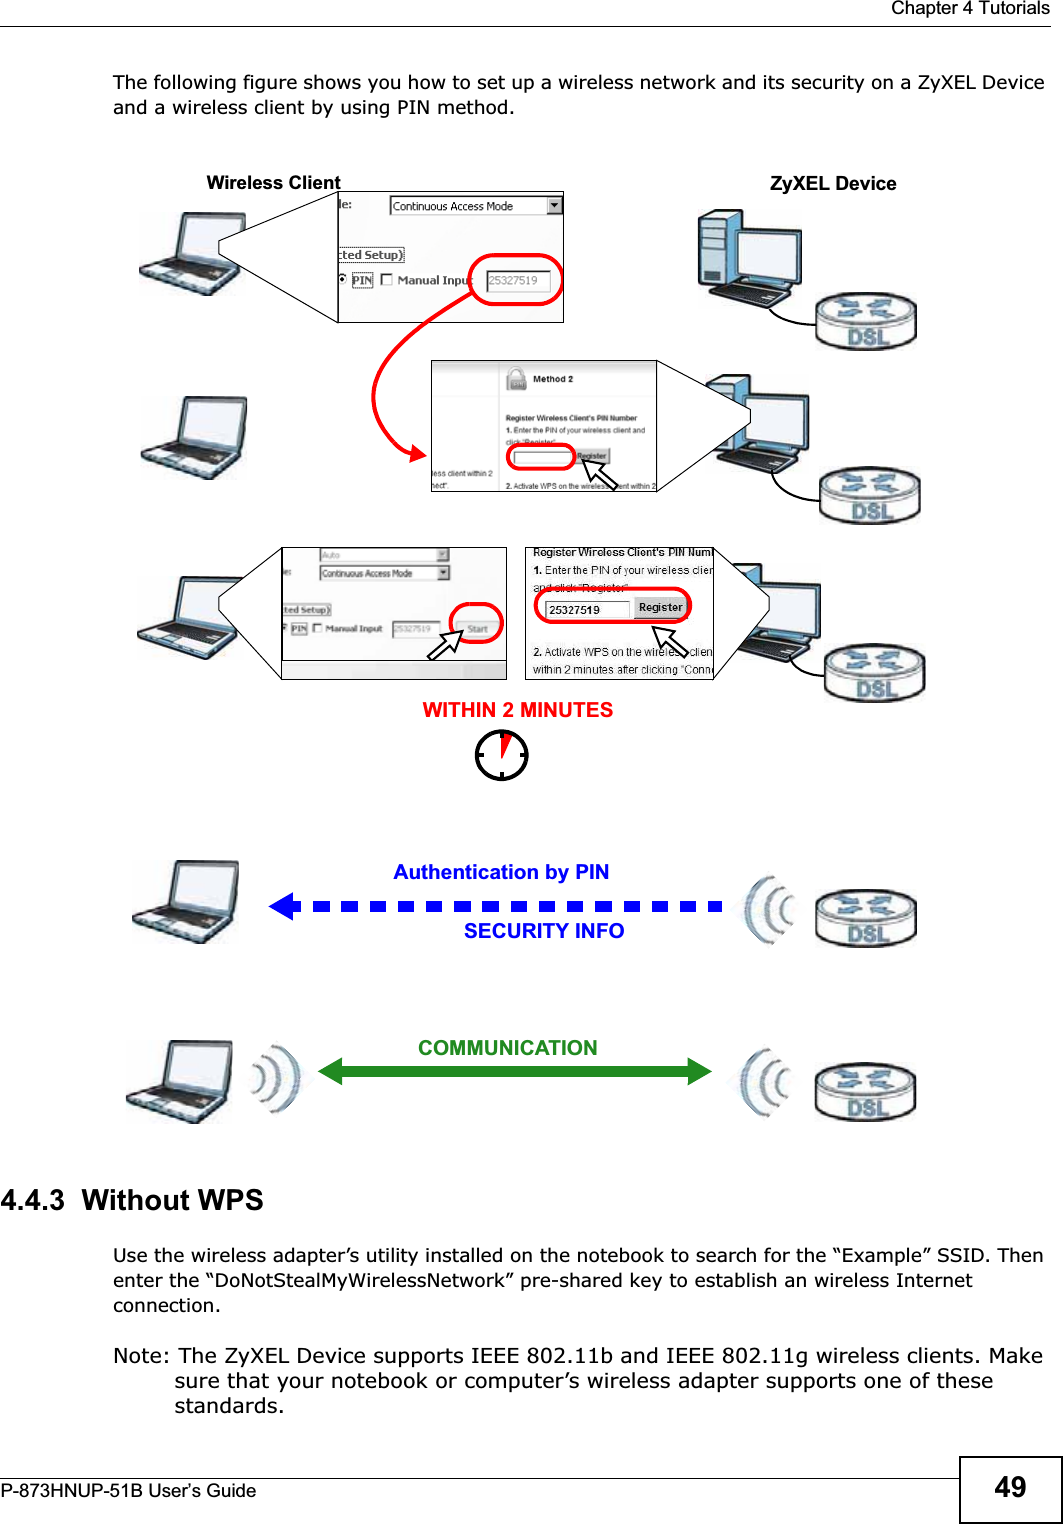  Chapter 4 TutorialsP-873HNUP-51B User’s Guide 49The following figure shows you how to set up a wireless network and its security on a ZyXEL Device and a wireless client by using PIN method. Example WPS Process: PIN Method4.4.3  Without WPSUse the wireless adapter’s utility installed on the notebook to search for the “Example” SSID. Then enter the “DoNotStealMyWirelessNetwork” pre-shared key to establish an wireless Internet connection.Note: The ZyXEL Device supports IEEE 802.11b and IEEE 802.11g wireless clients. Make sure that your notebook or computer’s wireless adapter supports one of these standards.Authentication by PINSECURITY INFOWITHIN 2 MINUTESWireless ClientZyXEL DeviceCOMMUNICATION